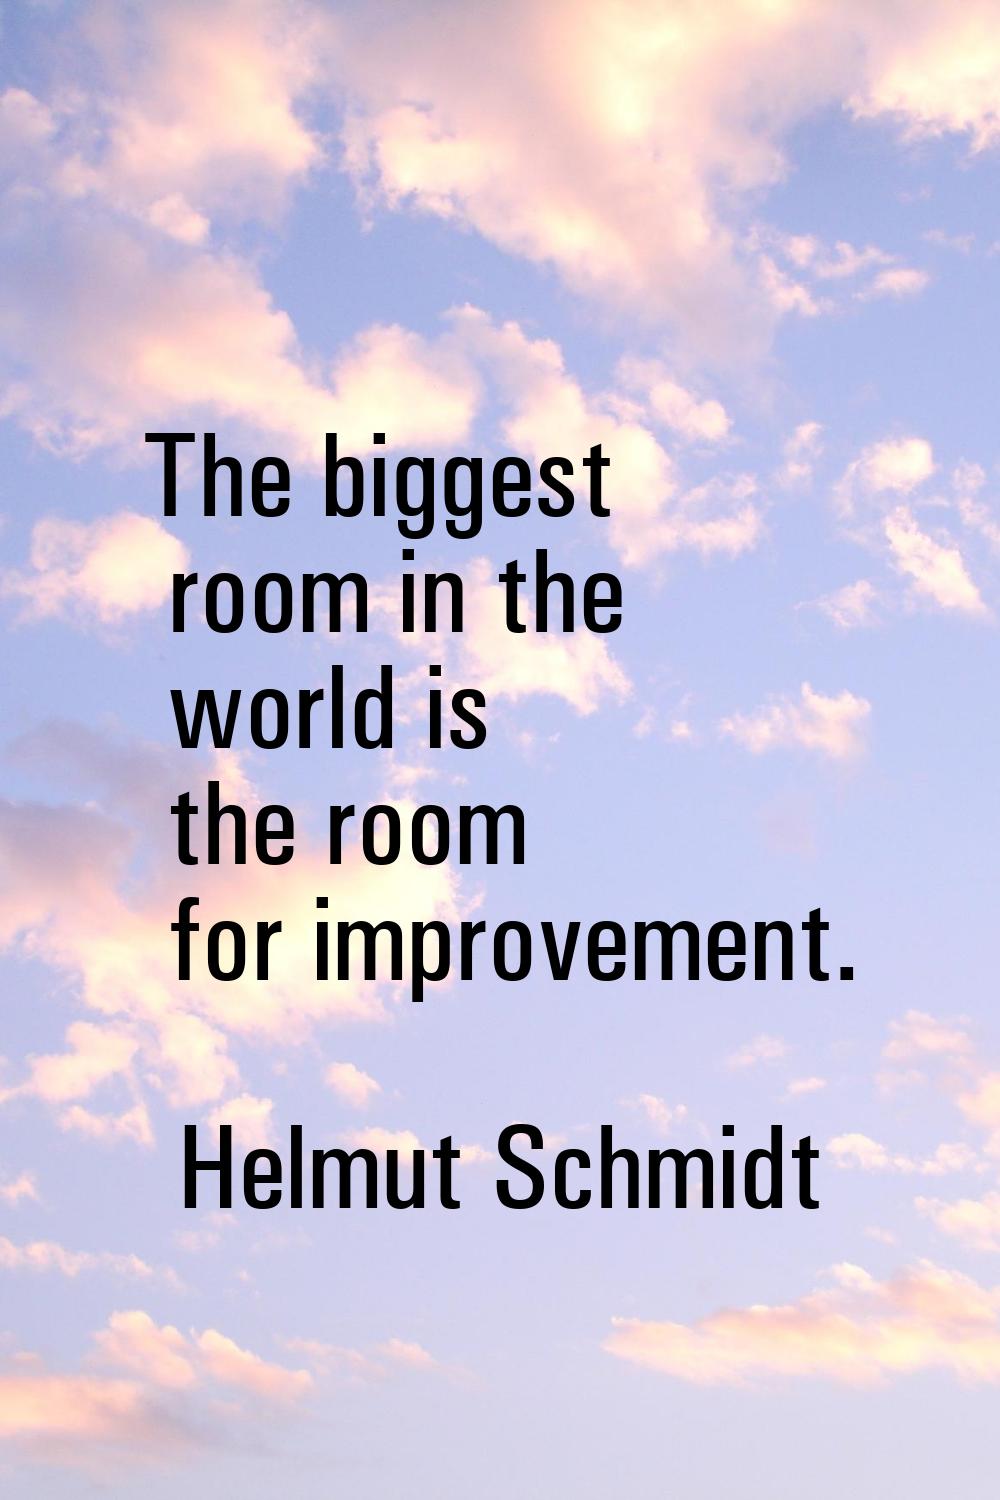 The biggest room in the world is the room for improvement.